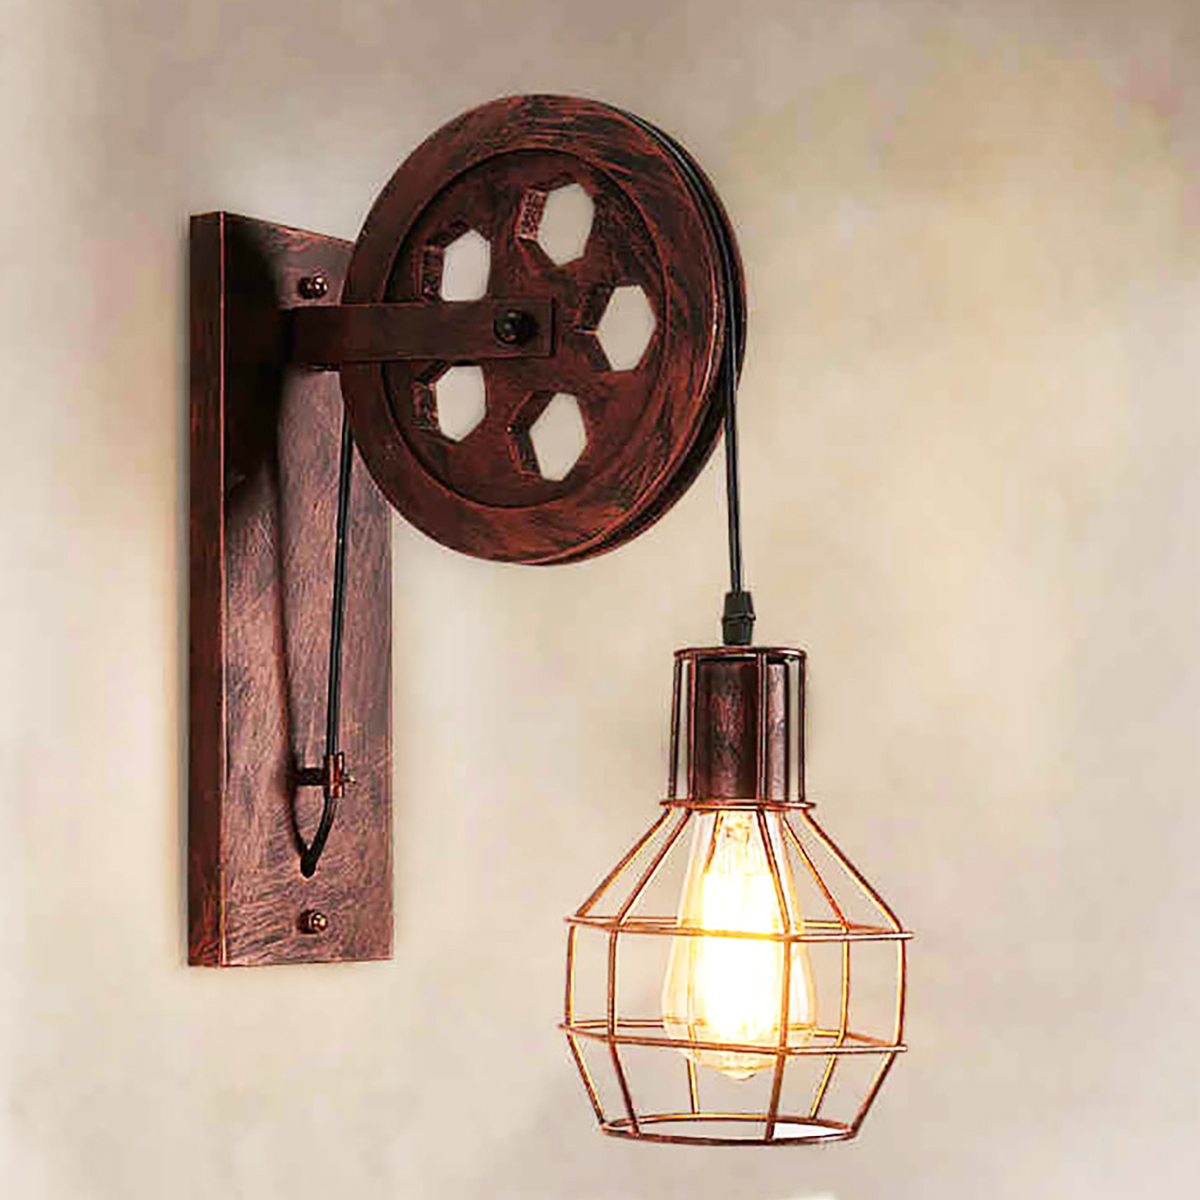 Adjustable-Retro-Iron-Wall-Lamp-Lifting-Pulley-E27-Sconce-Light-Indoor-4-Color-Without-Light-Bulb-1709520-2